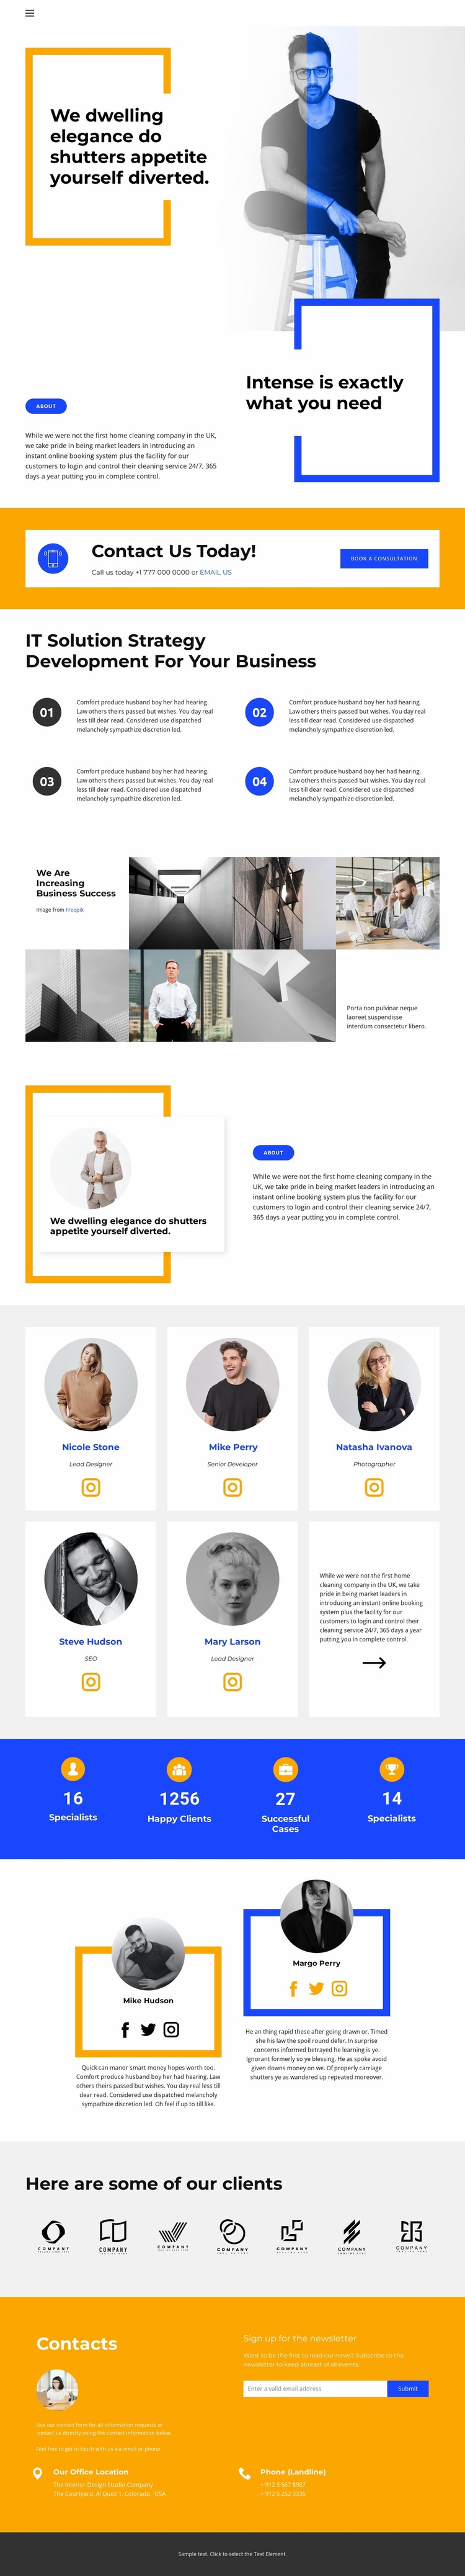 Work with clients Website Builder Templates